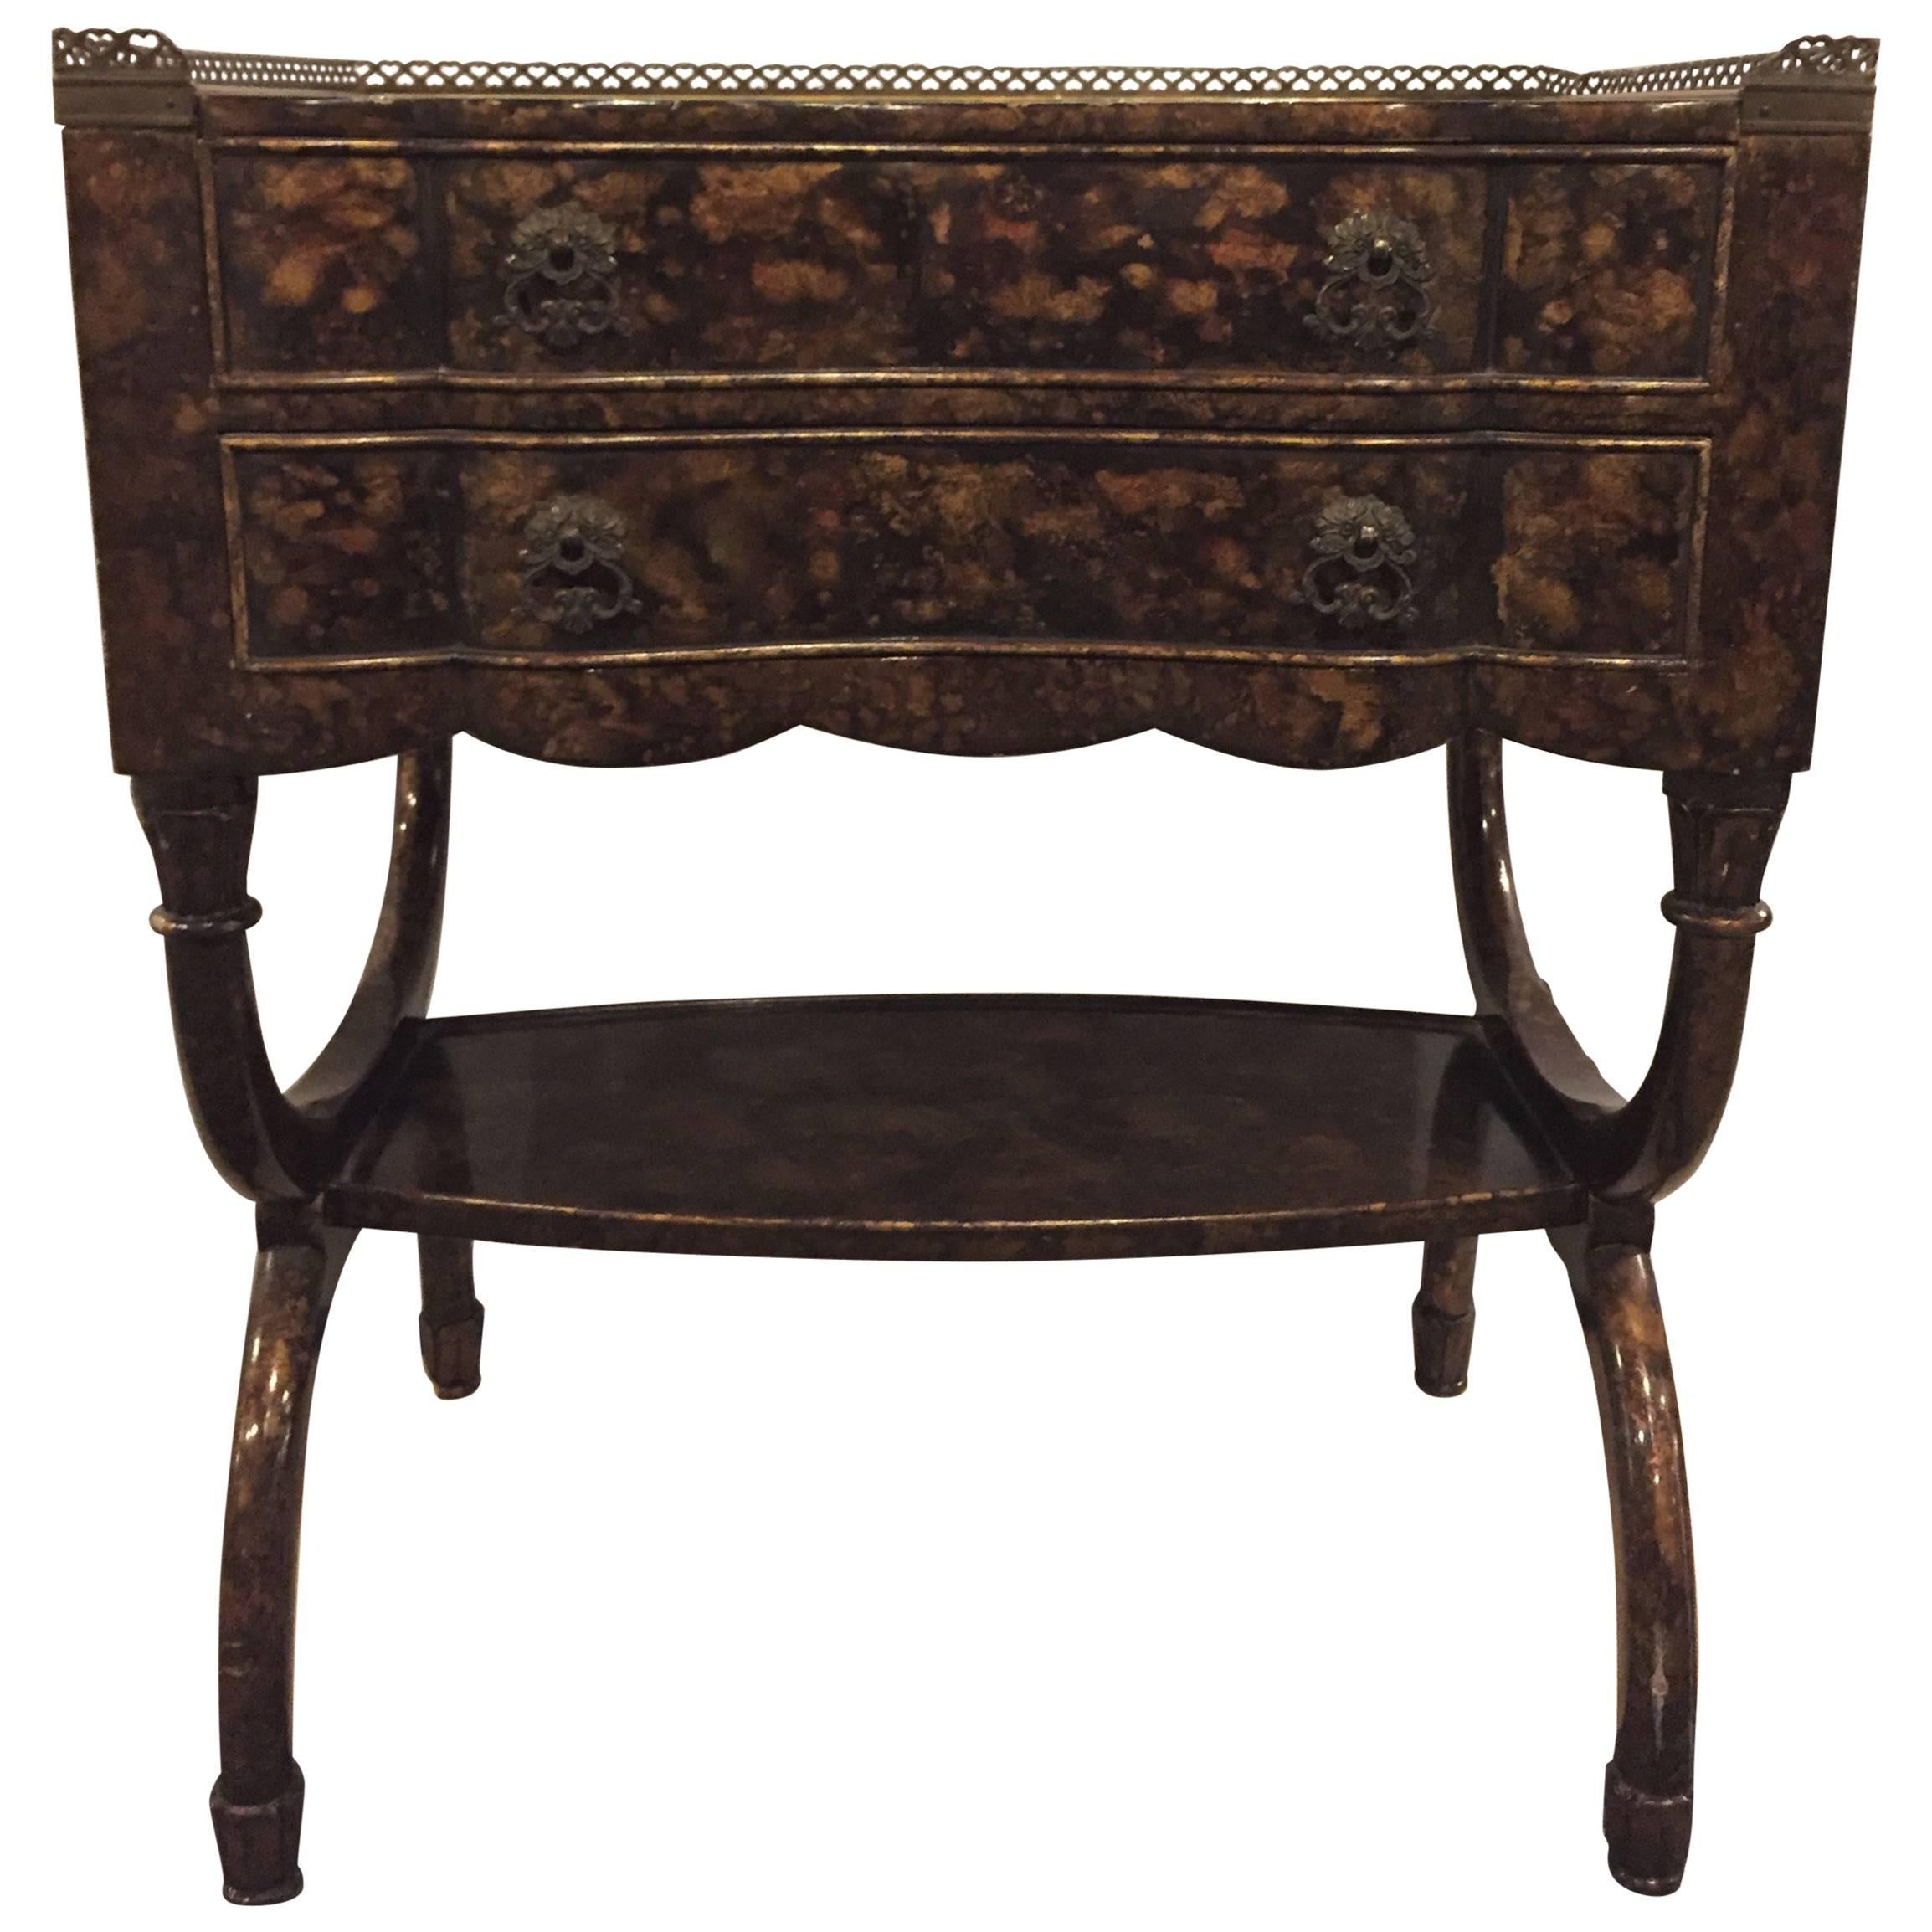 Regency Style Faux Tortoise Decorated End Table